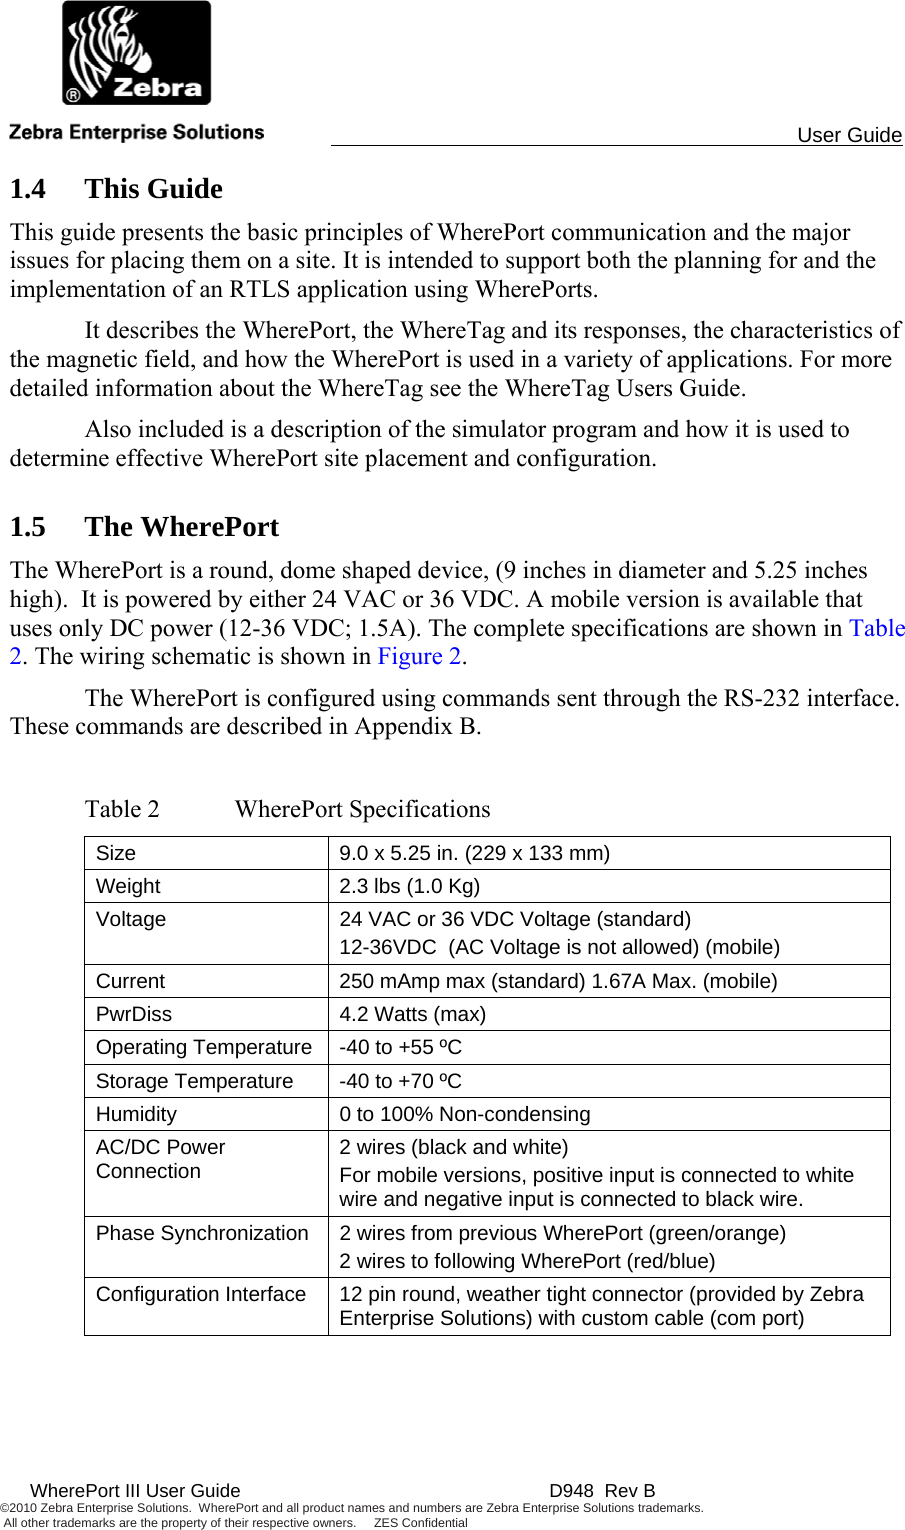                                                                                                 User Guide  WherePort III User Guide    D948  Rev B ©2010 Zebra Enterprise Solutions.  WherePort and all product names and numbers are Zebra Enterprise Solutions trademarks.  All other trademarks are the property of their respective owners.     ZES Confidential     1.4 This Guide This guide presents the basic principles of WherePort communication and the major issues for placing them on a site. It is intended to support both the planning for and the implementation of an RTLS application using WherePorts.   It describes the WherePort, the WhereTag and its responses, the characteristics of the magnetic field, and how the WherePort is used in a variety of applications. For more detailed information about the WhereTag see the WhereTag Users Guide.    Also included is a description of the simulator program and how it is used to determine effective WherePort site placement and configuration. 1.5 The WherePort The WherePort is a round, dome shaped device, (9 inches in diameter and 5.25 inches high).  It is powered by either 24 VAC or 36 VDC. A mobile version is available that uses only DC power (12-36 VDC; 1.5A). The complete specifications are shown in Table 2. The wiring schematic is shown in Figure 2.   The WherePort is configured using commands sent through the RS-232 interface. These commands are described in Appendix B.   Table 2  WherePort Specifications Size  9.0 x 5.25 in. (229 x 133 mm)  Weight  2.3 lbs (1.0 Kg) Voltage  24 VAC or 36 VDC Voltage (standard) 12-36VDC  (AC Voltage is not allowed) (mobile) Current  250 mAmp max (standard) 1.67A Max. (mobile) PwrDiss  4.2 Watts (max) Operating Temperature  -40 to +55 ºC Storage Temperature  -40 to +70 ºC Humidity  0 to 100% Non-condensing AC/DC Power Connection  2 wires (black and white) For mobile versions, positive input is connected to white wire and negative input is connected to black wire. Phase Synchronization  2 wires from previous WherePort (green/orange) 2 wires to following WherePort (red/blue) Configuration Interface  12 pin round, weather tight connector (provided by Zebra Enterprise Solutions) with custom cable (com port)  